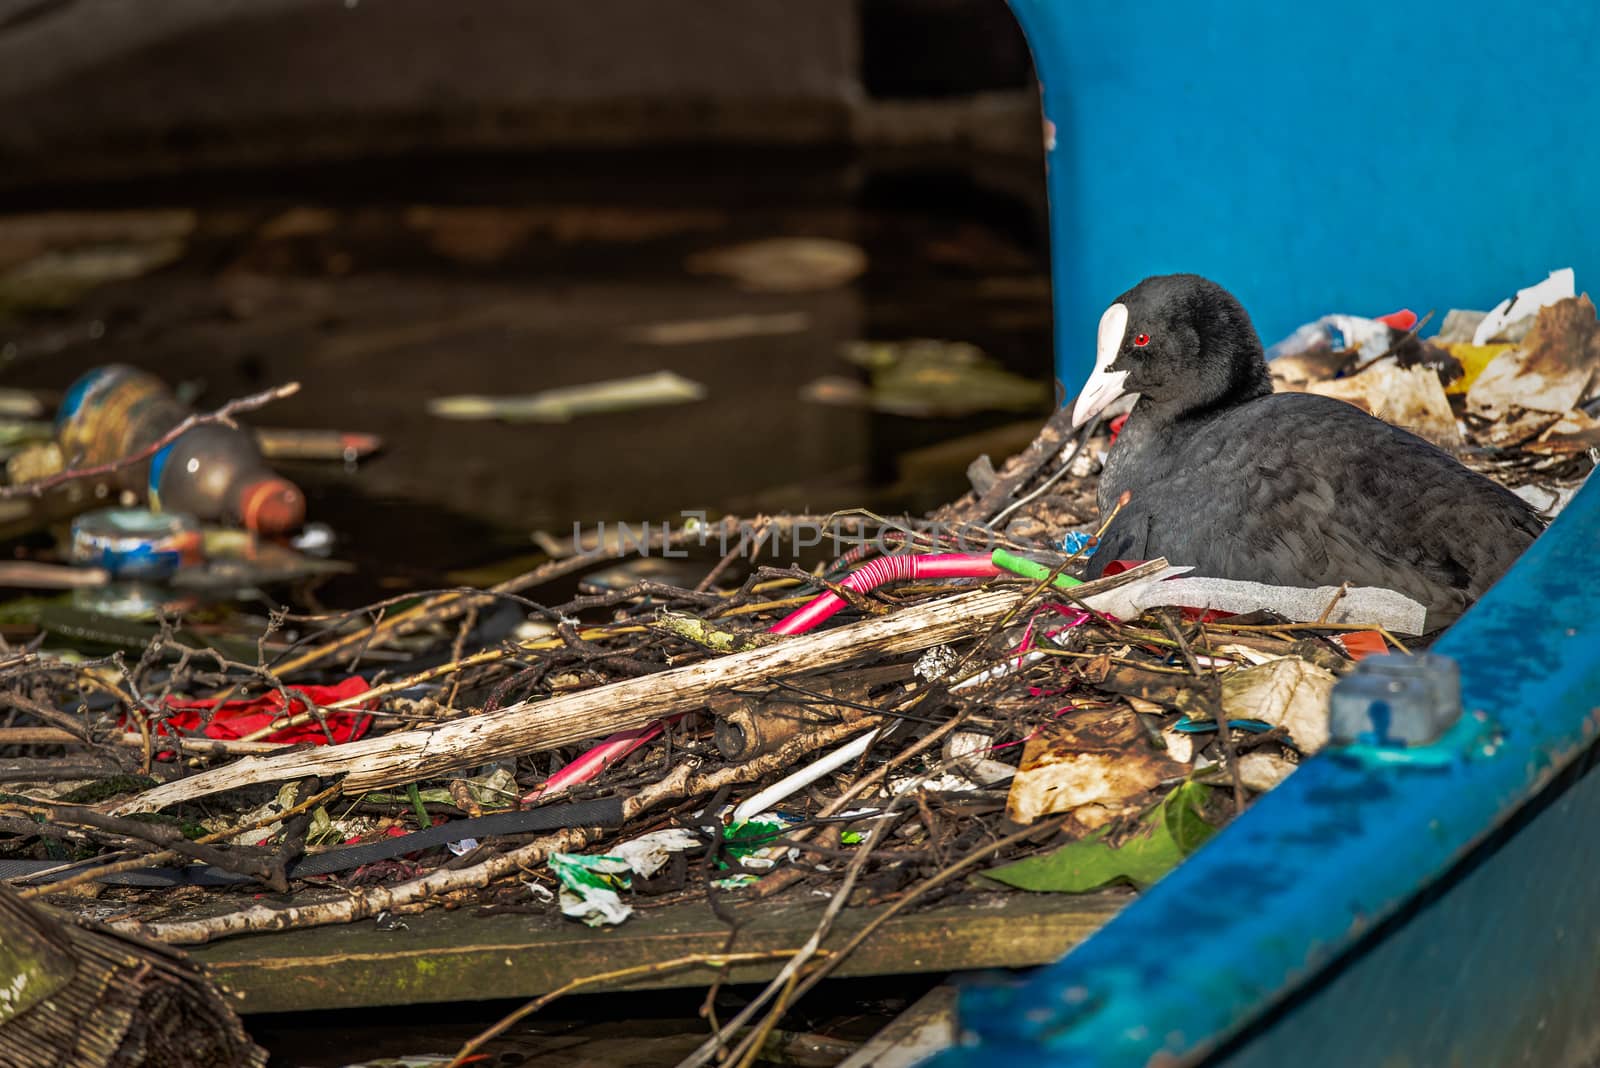 A Eurasian Coot sits on a nest built with trash in an Amsterdam canal by Pendleton